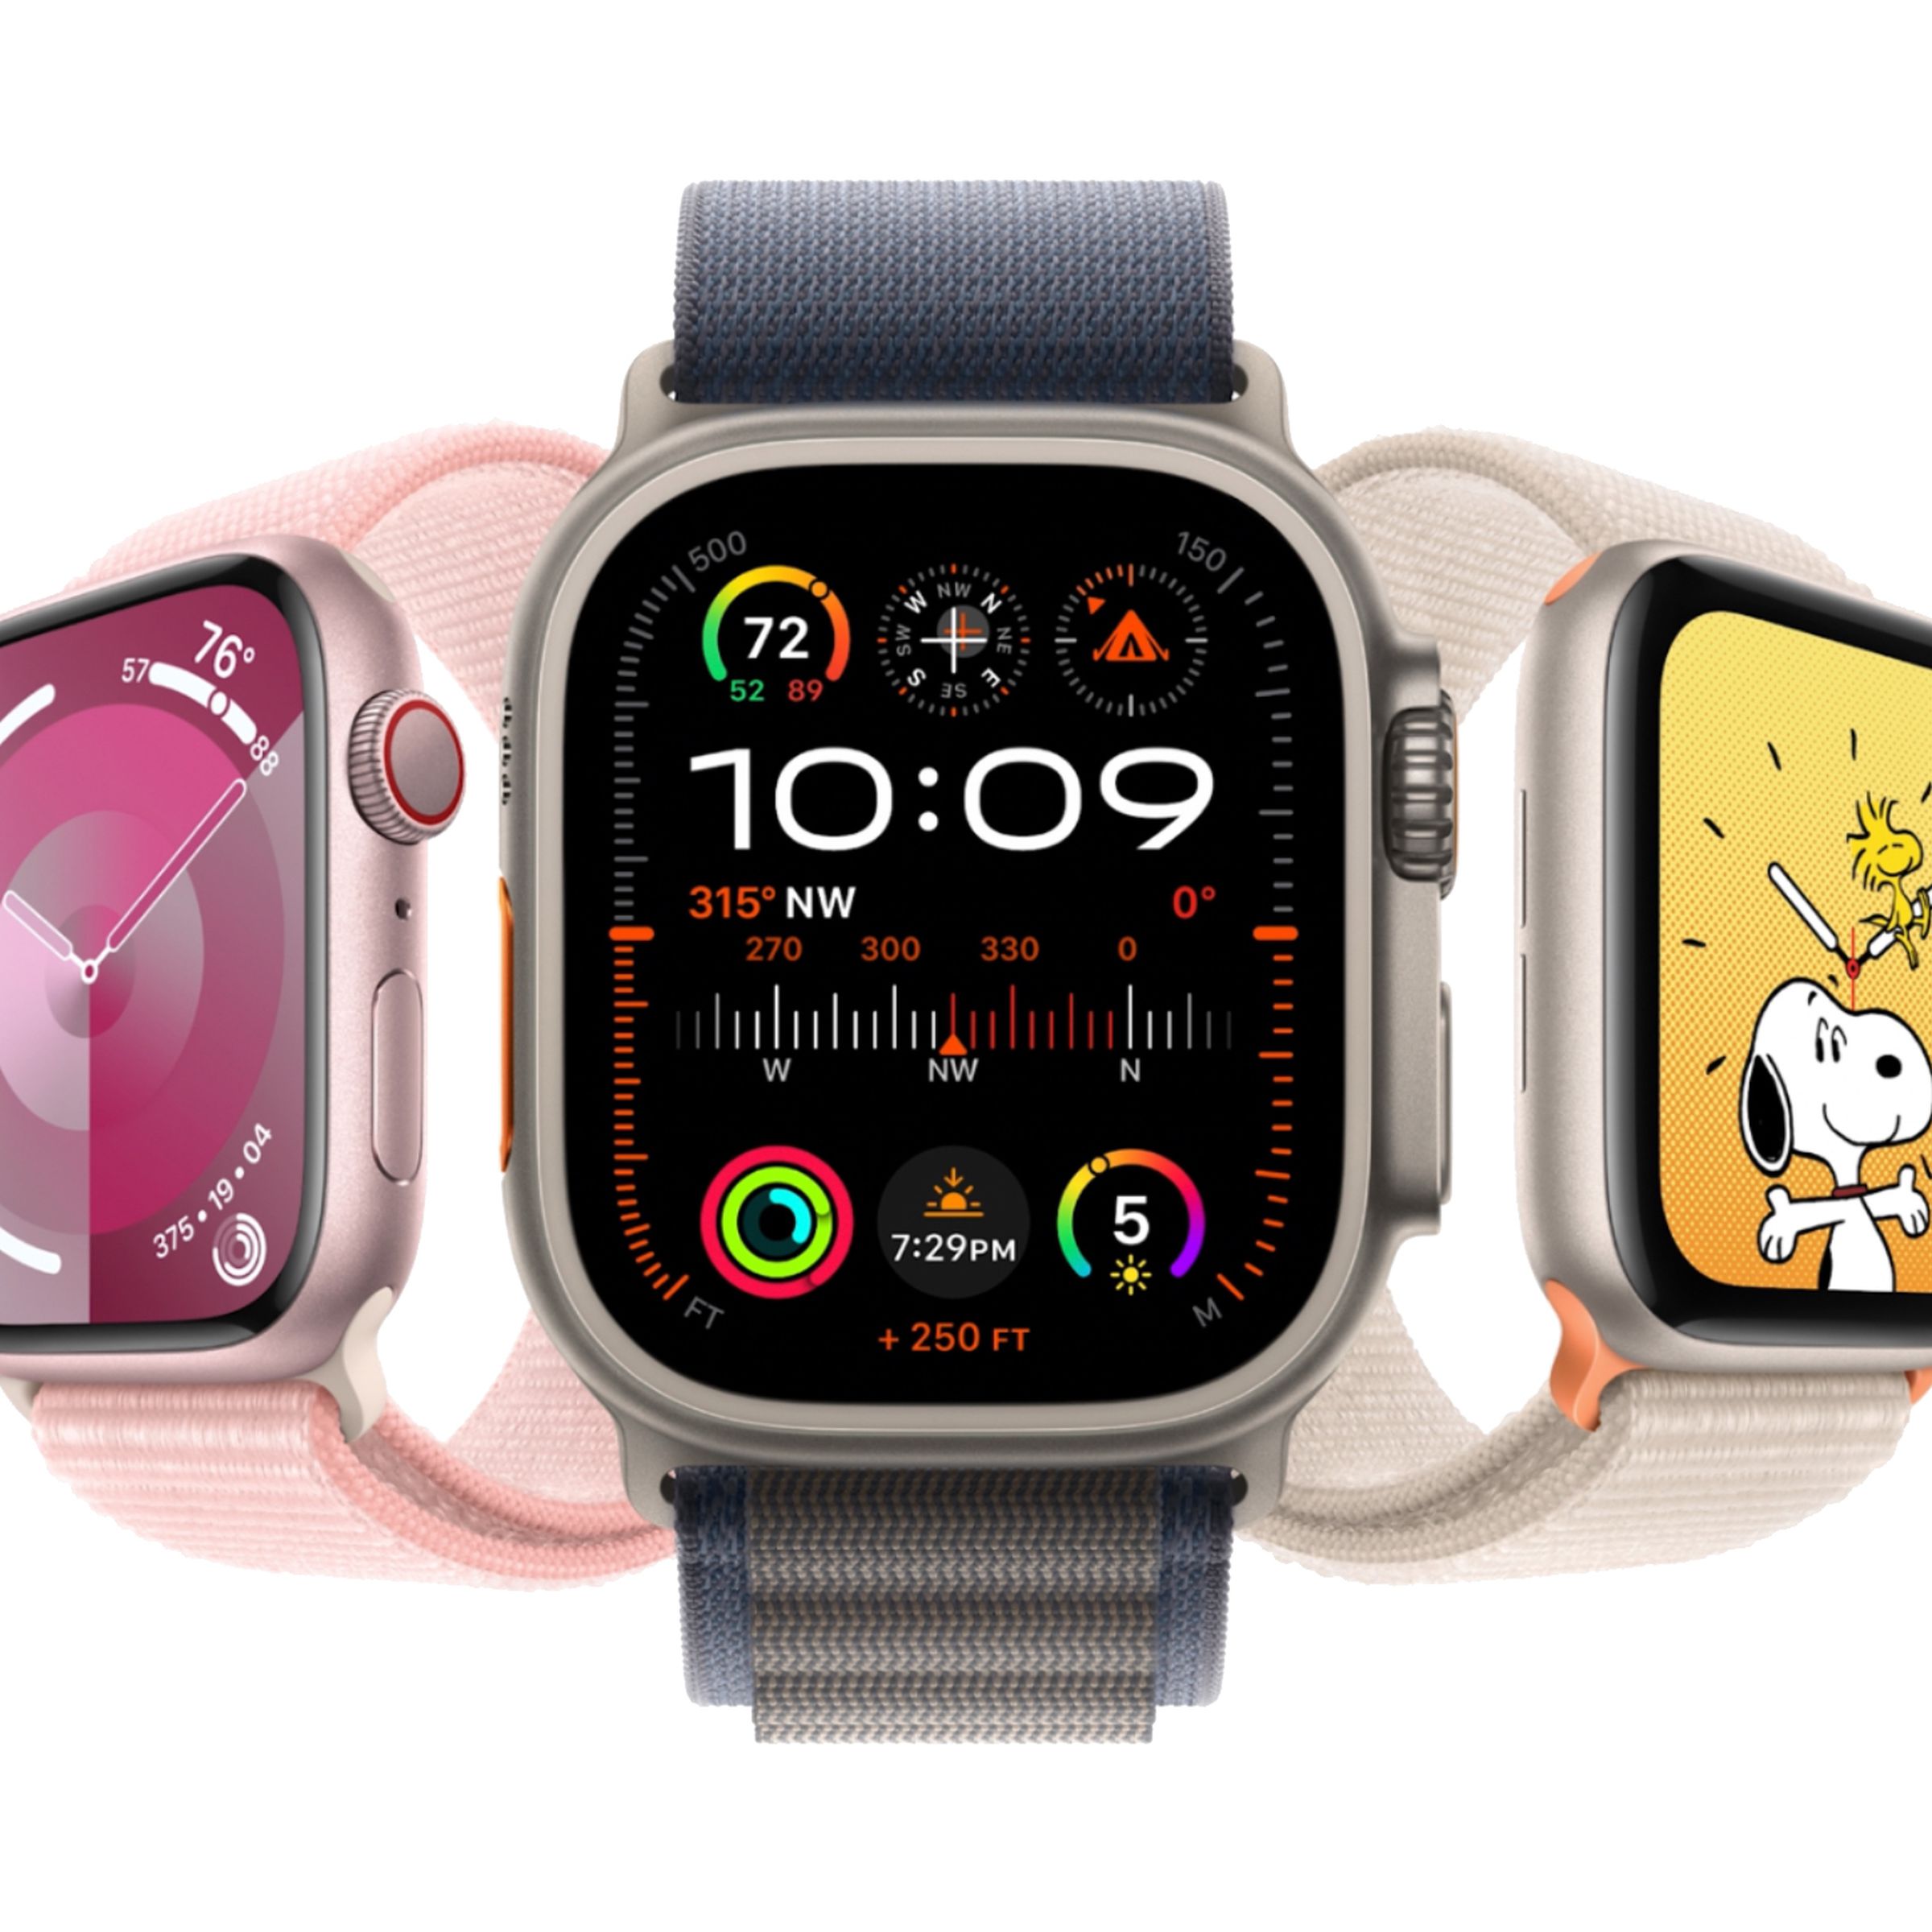 Apple’s forthcoming watches boast better performance, a new ultra wideband chip, and other minor improvements.